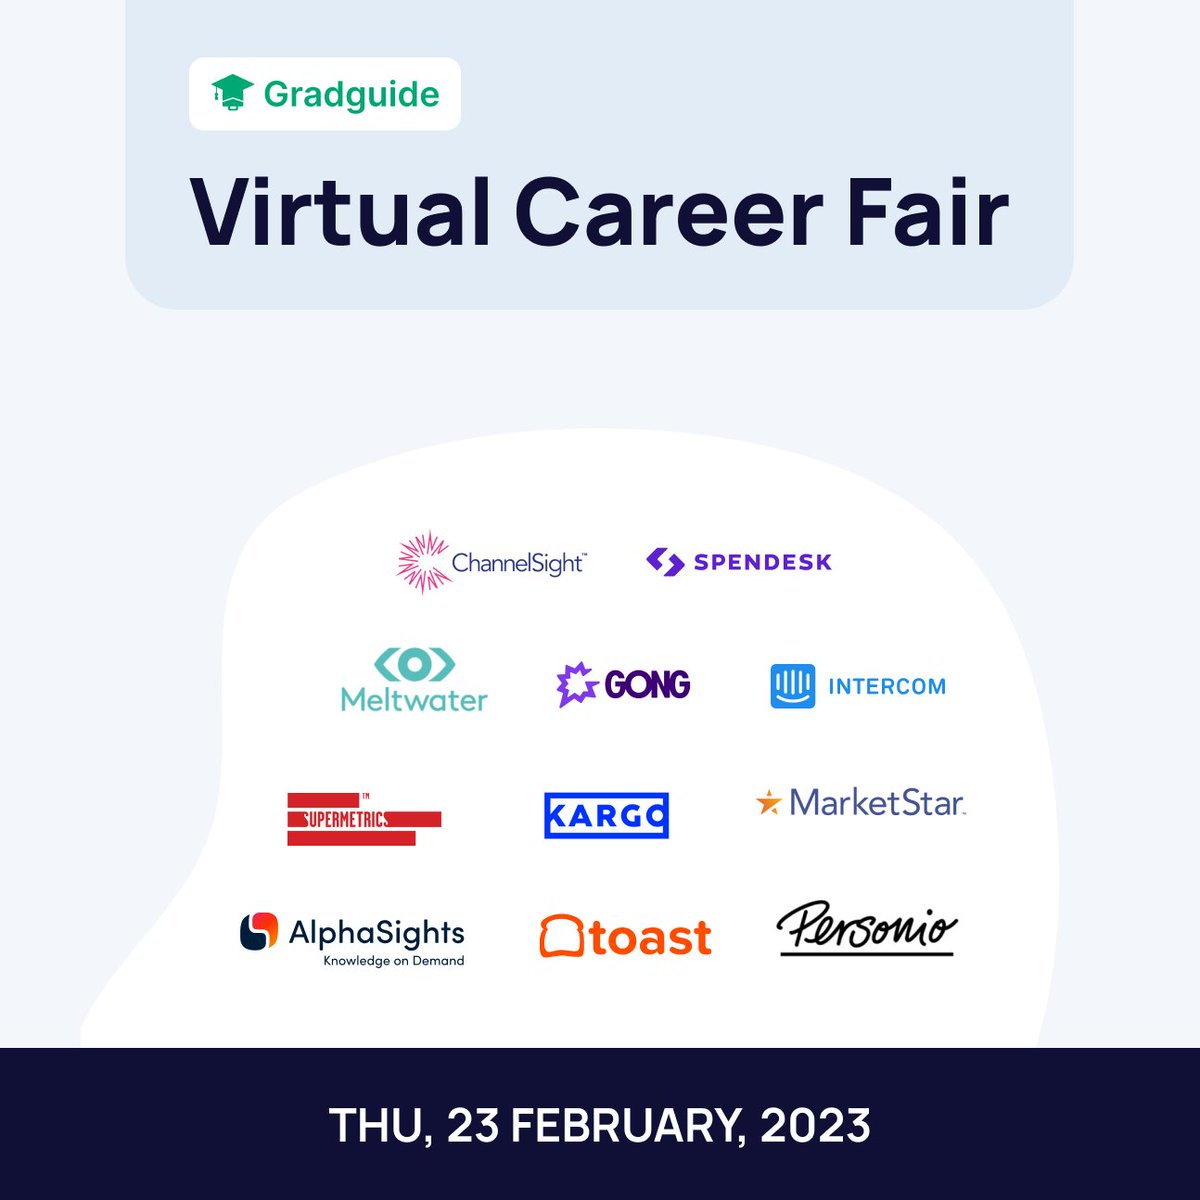 The Gradguide Virtual Career Fair will be taking place on the 23rd of February. You will have the chance to connect directly with recruiters and hiring managers at some of the world's fastest-growing companies across the UK and Ireland. Sign up careerfair.gradguide.com/login